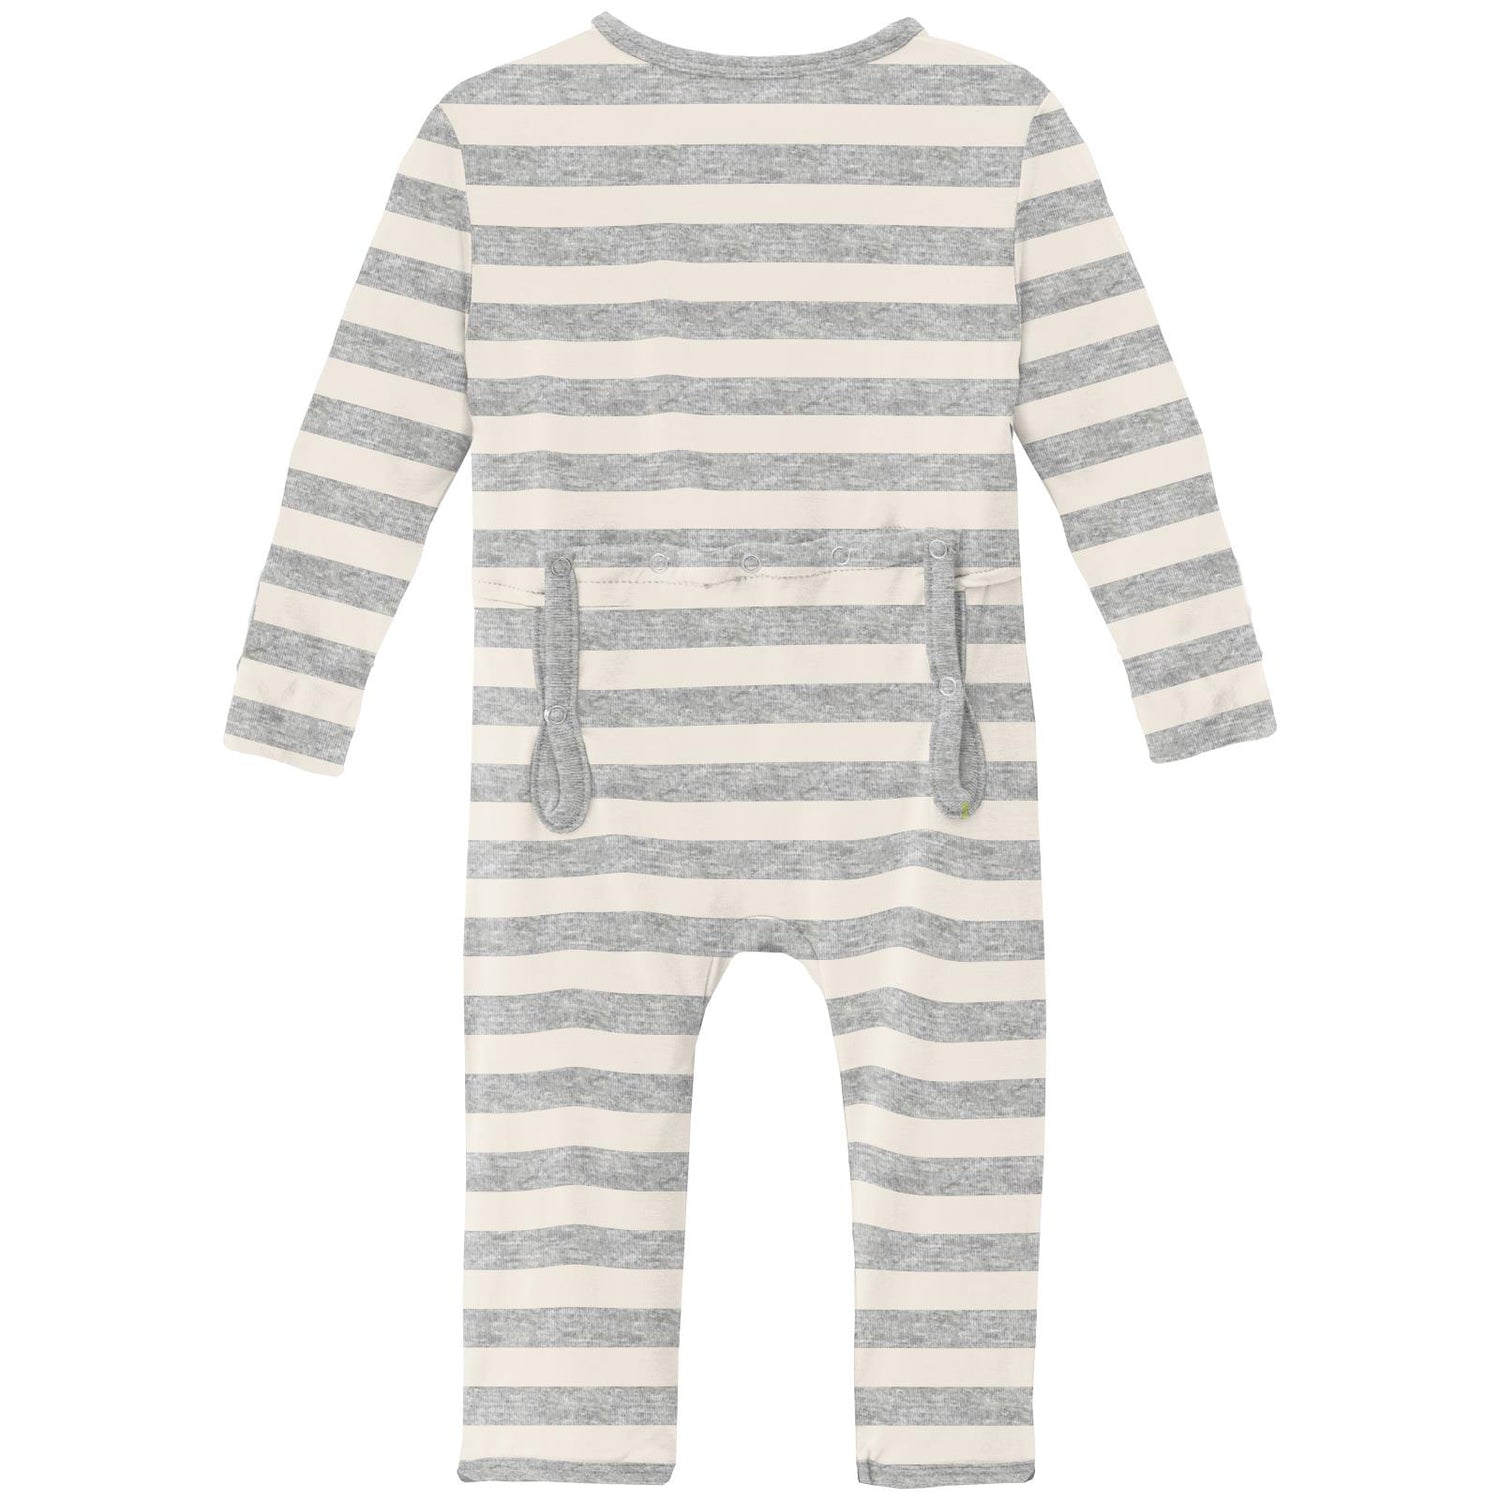 Print Coverall with 2 Way Zipper in Heathered Mist Sweet Stripe